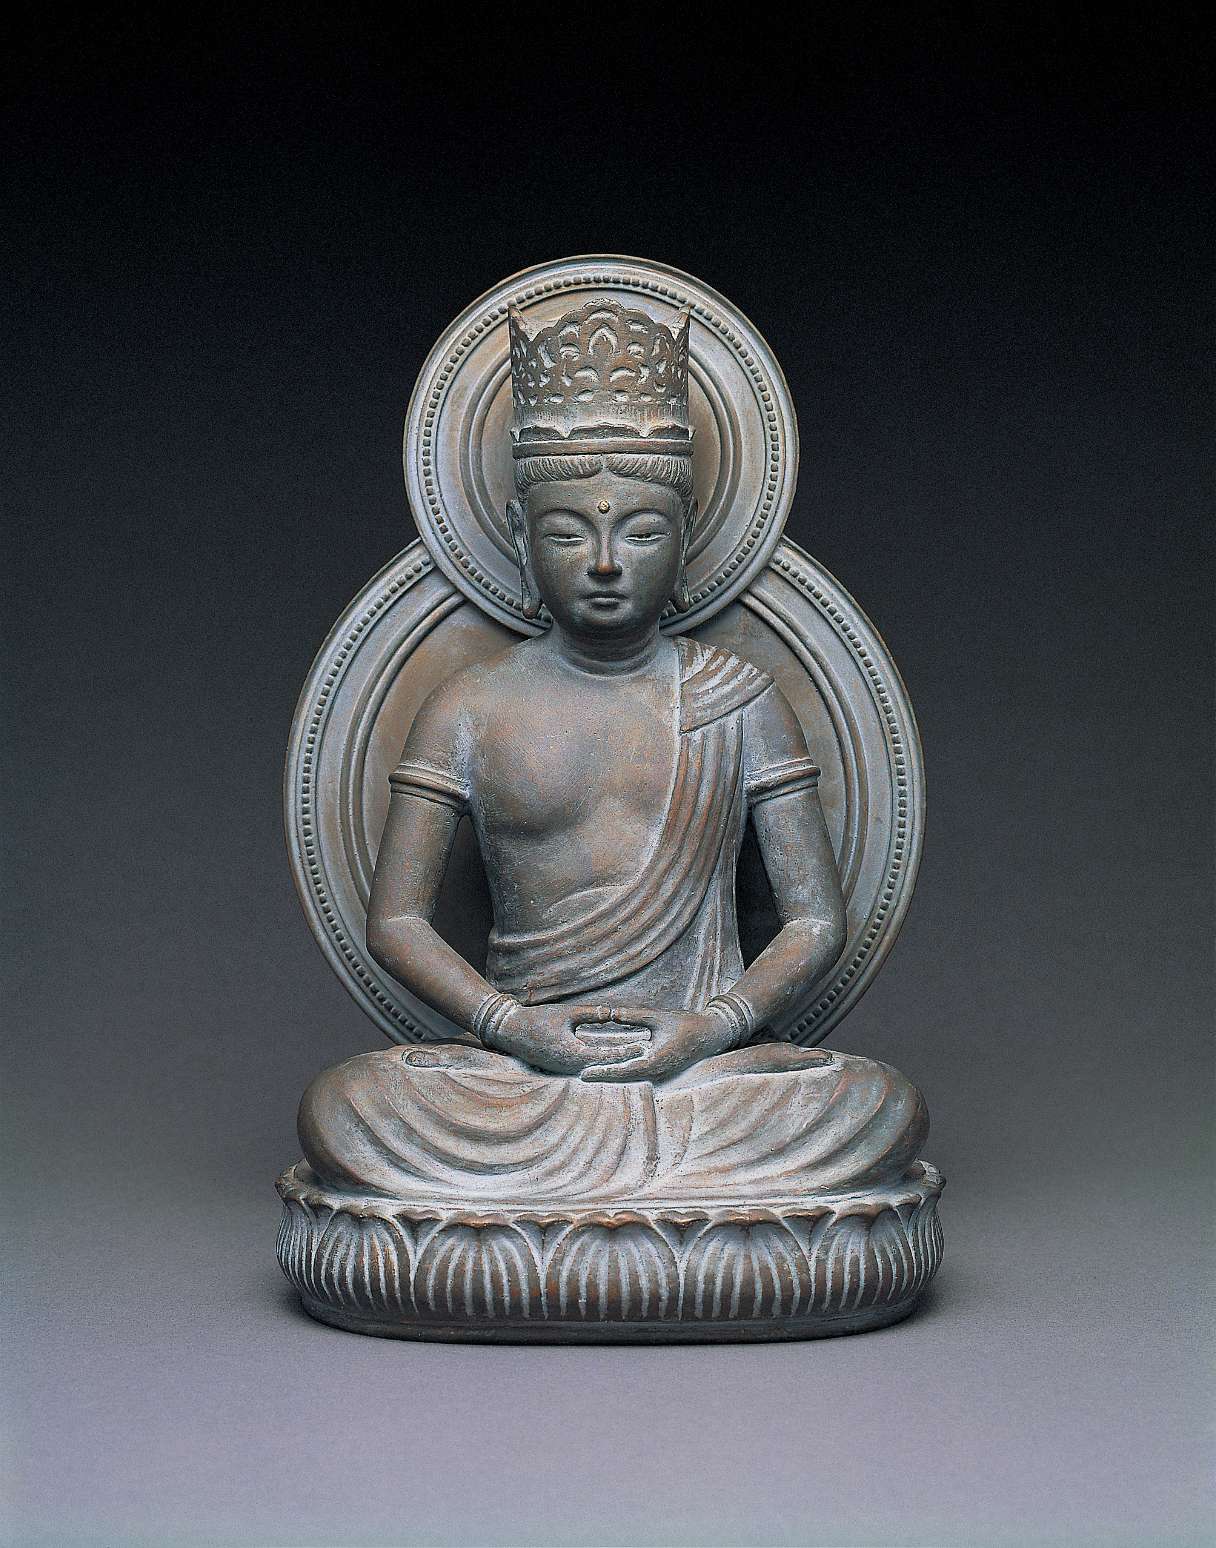 A matte, blue and gray hued  statue of a buddha wearing a tall crown, sitting cross-legged atop a seat of curving lotus petals, hands in meditation, with a circular nimbus behind his body and head.